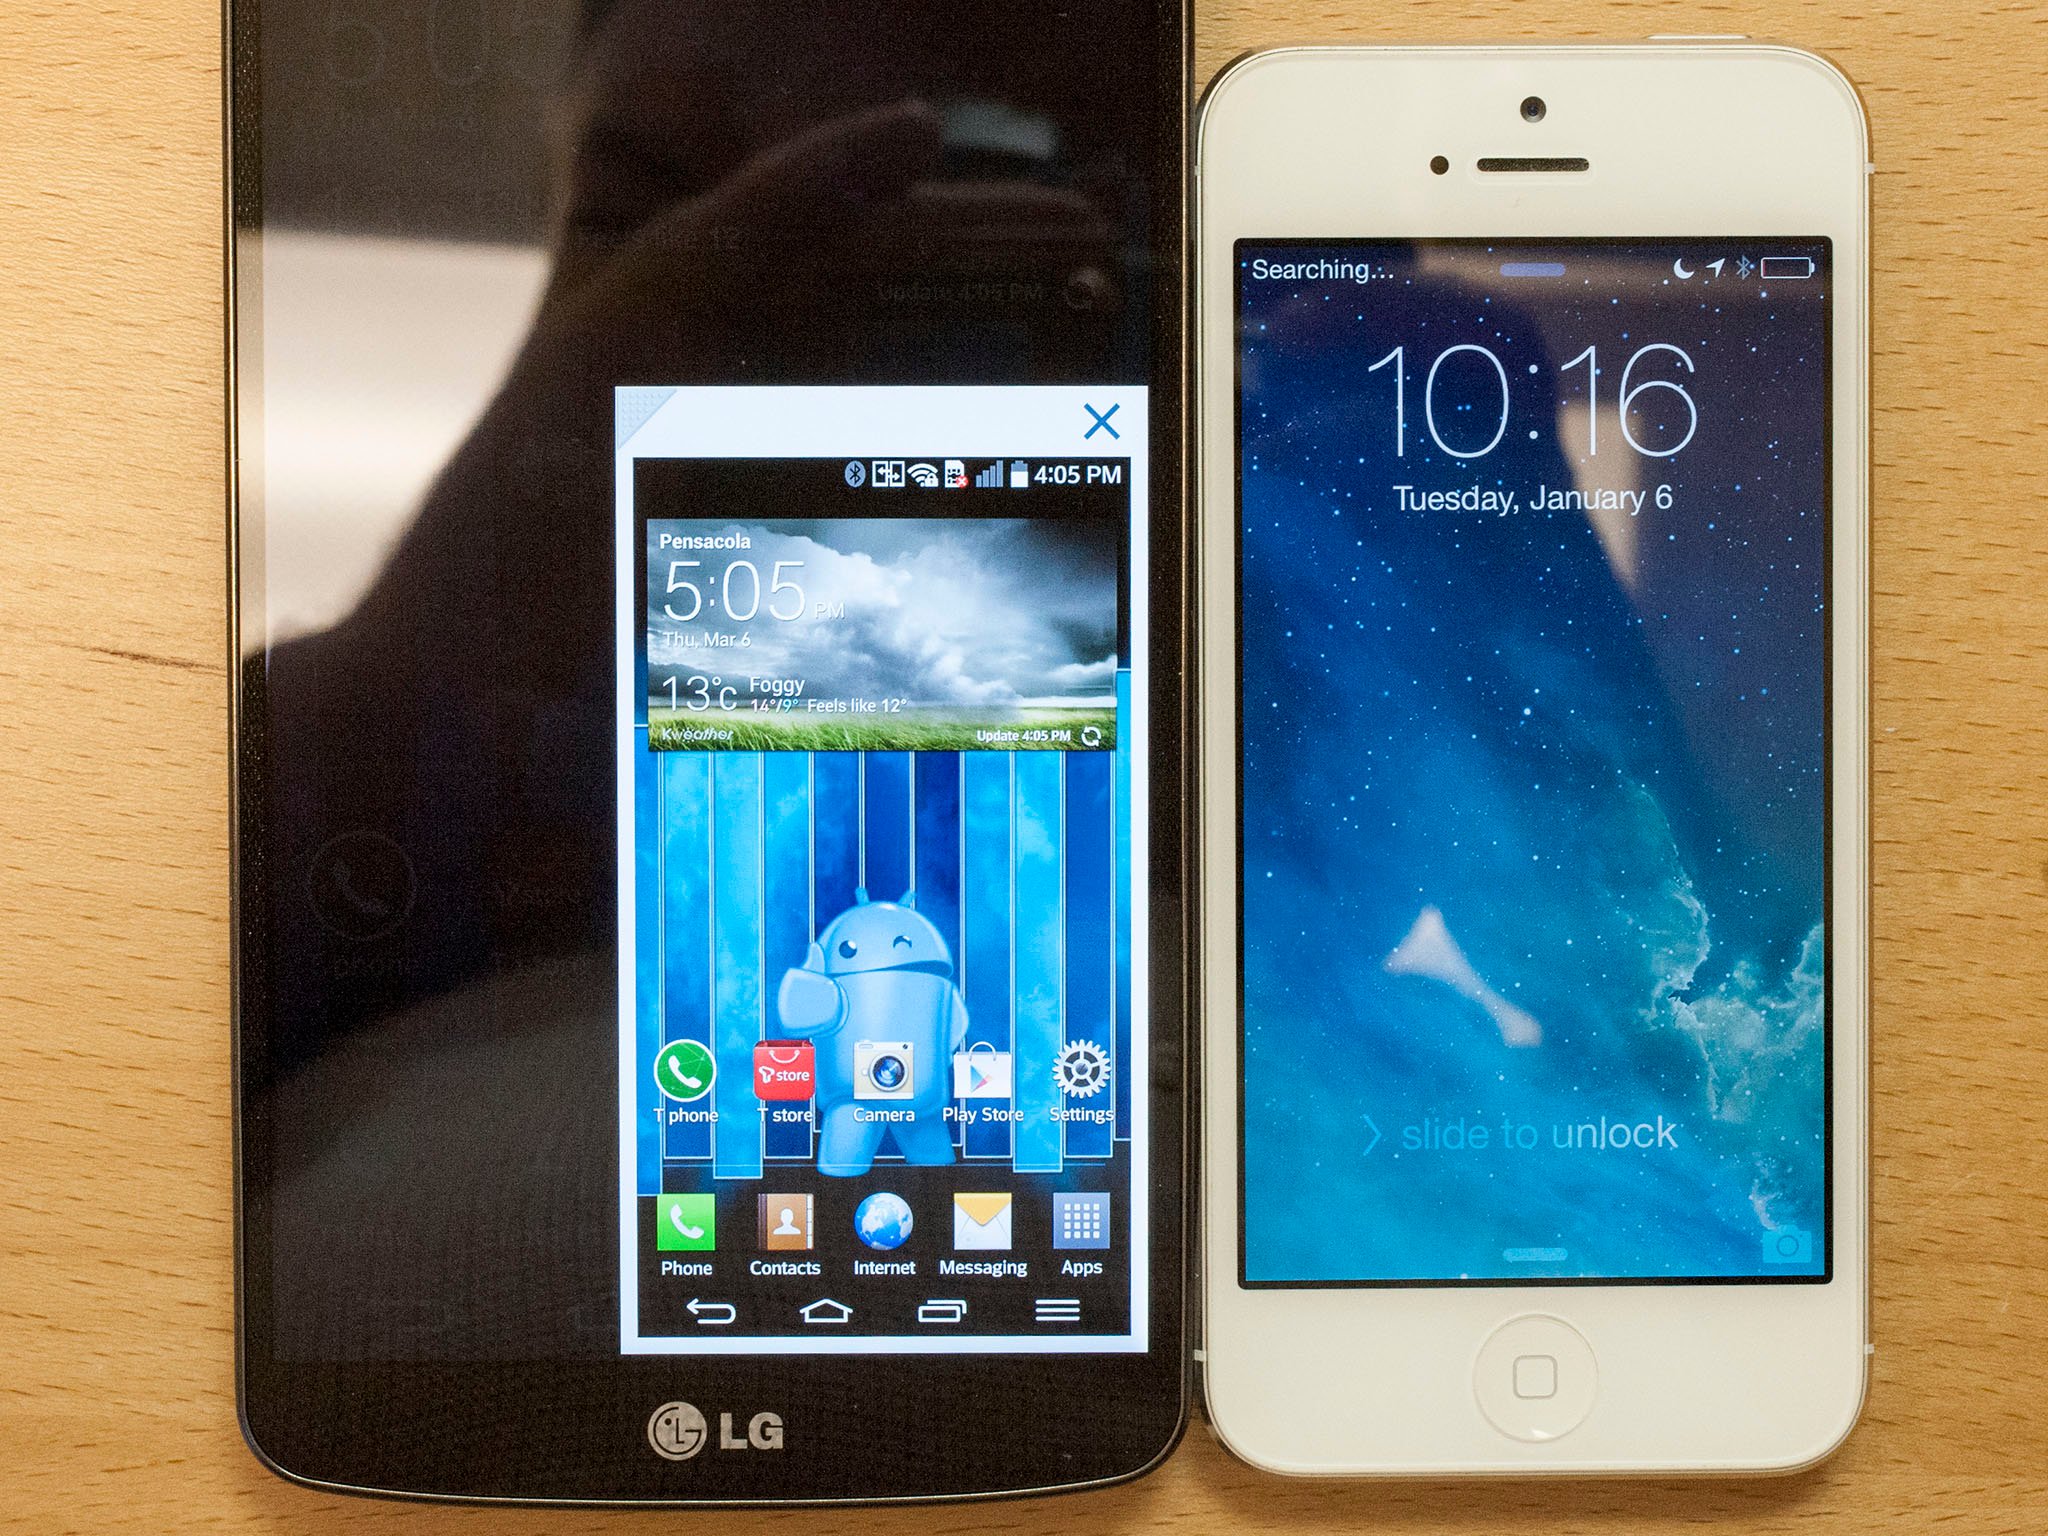 LG G Pro 2 Mini View and an iPhone 5